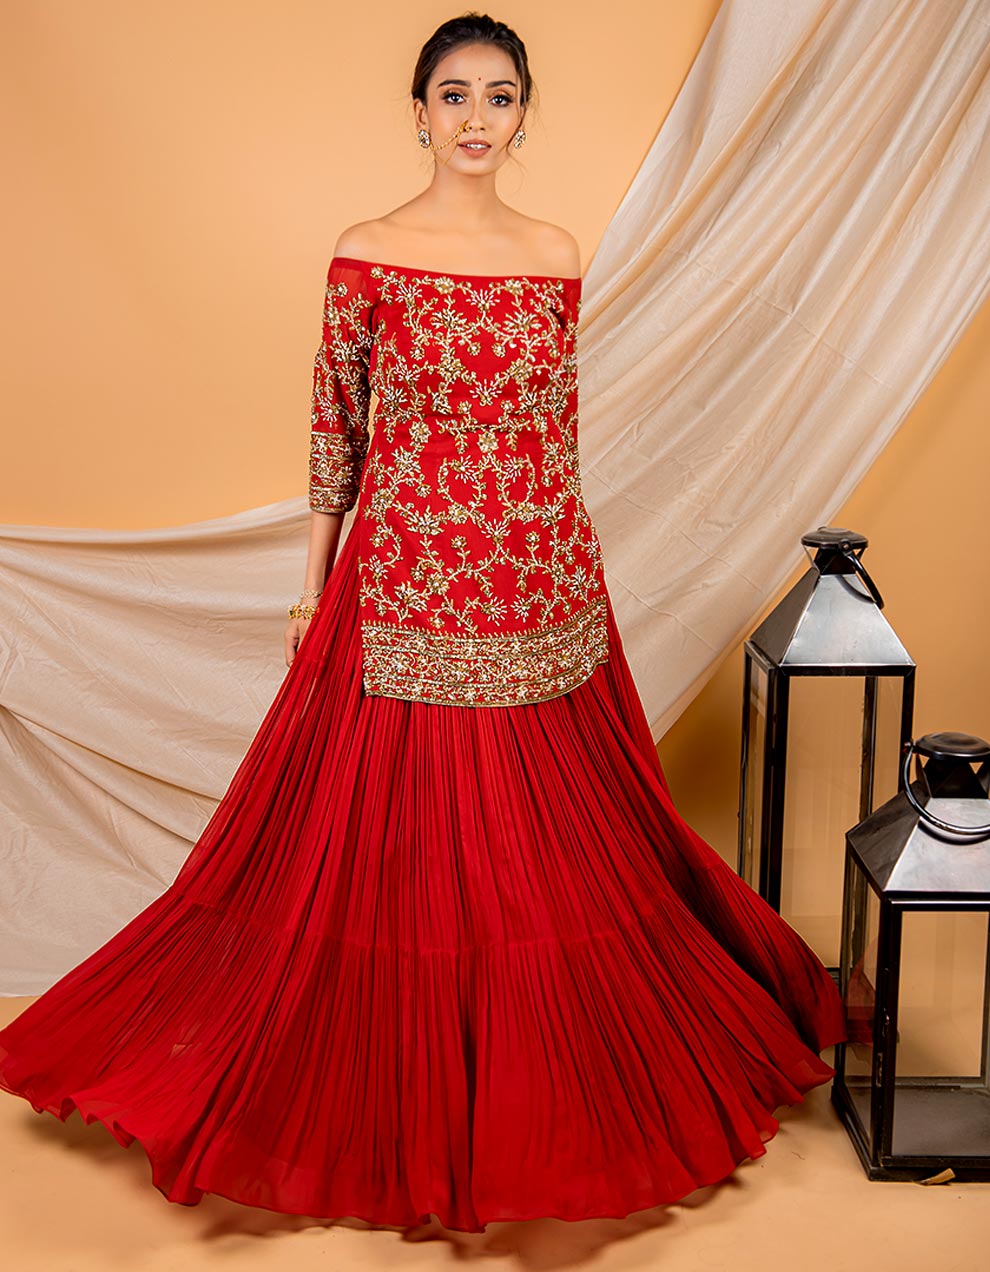 Buy-best-Red-embroidered-short-kurti-with-gathered-skirt-and-dupatta-dress-for-women-in-India